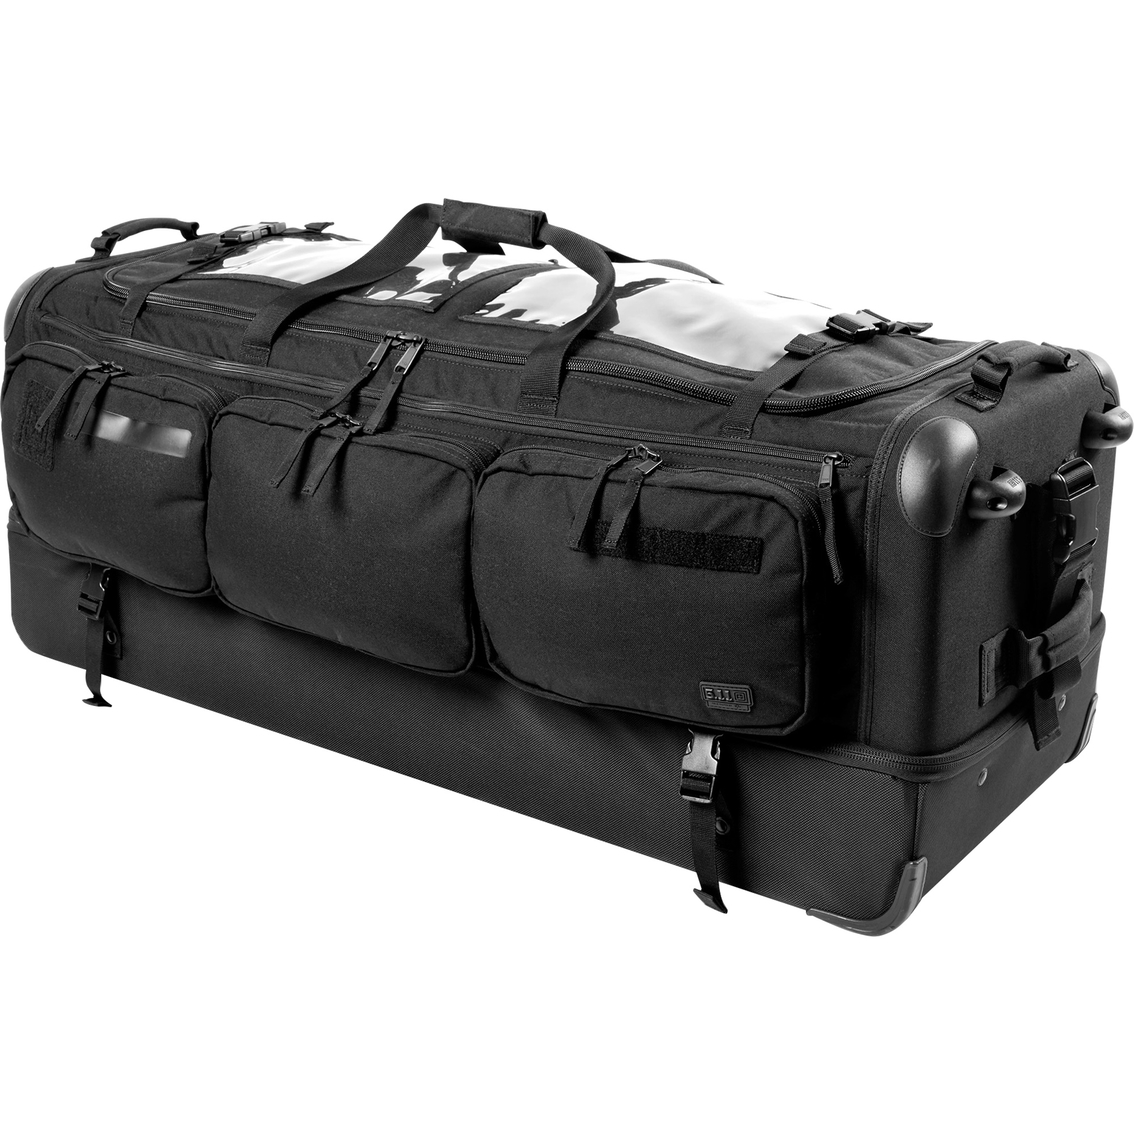 5.11 Rolling CAMS 3.0 Duffel - Image 2 of 5